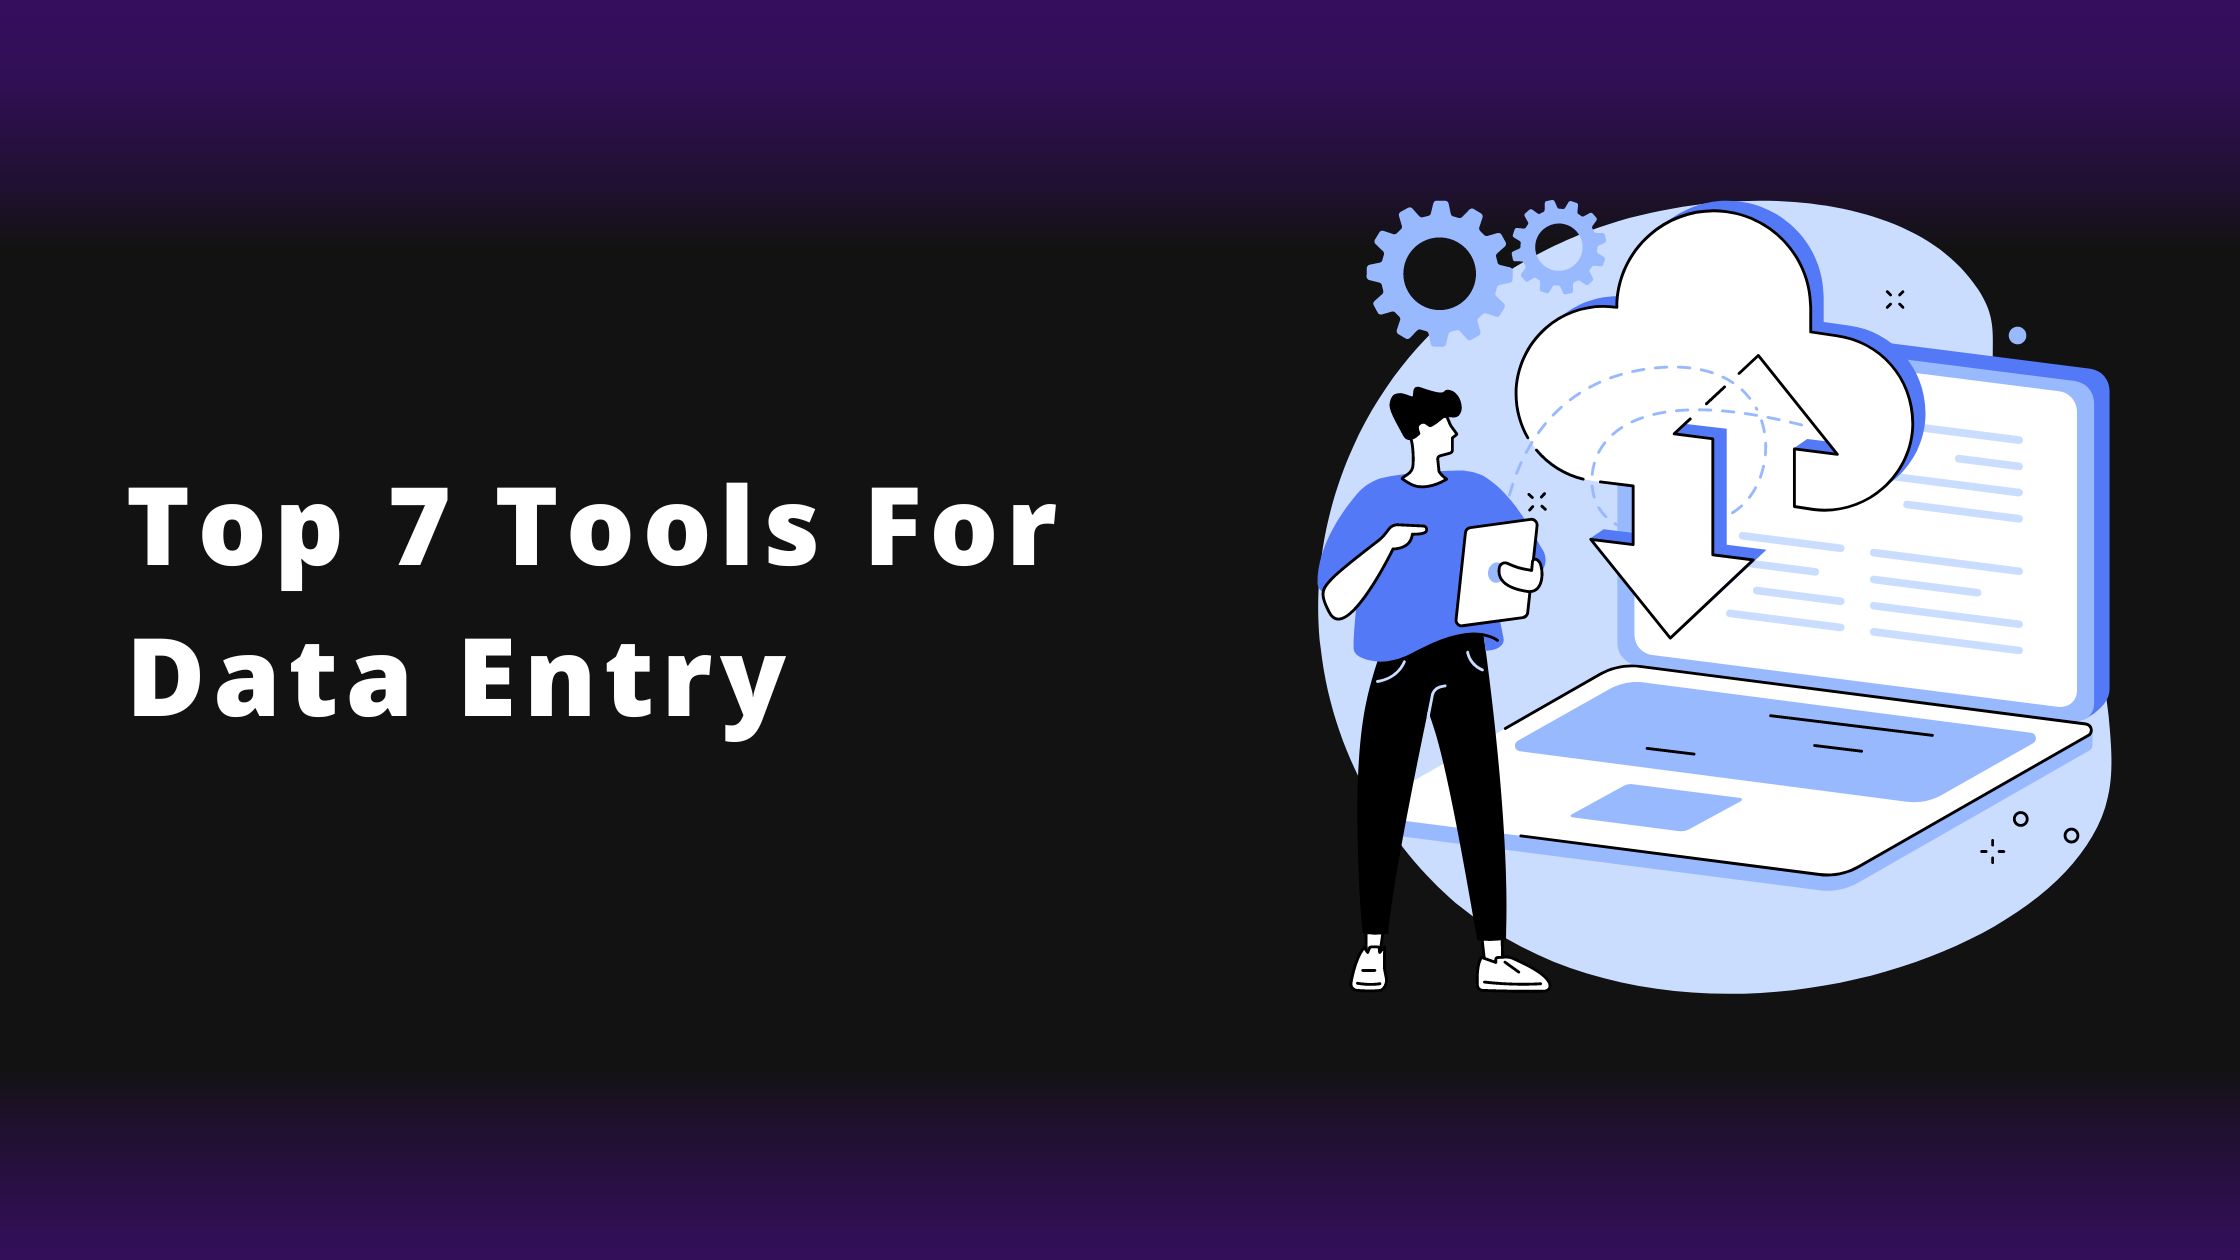 Top 7 Tools For Data Entry